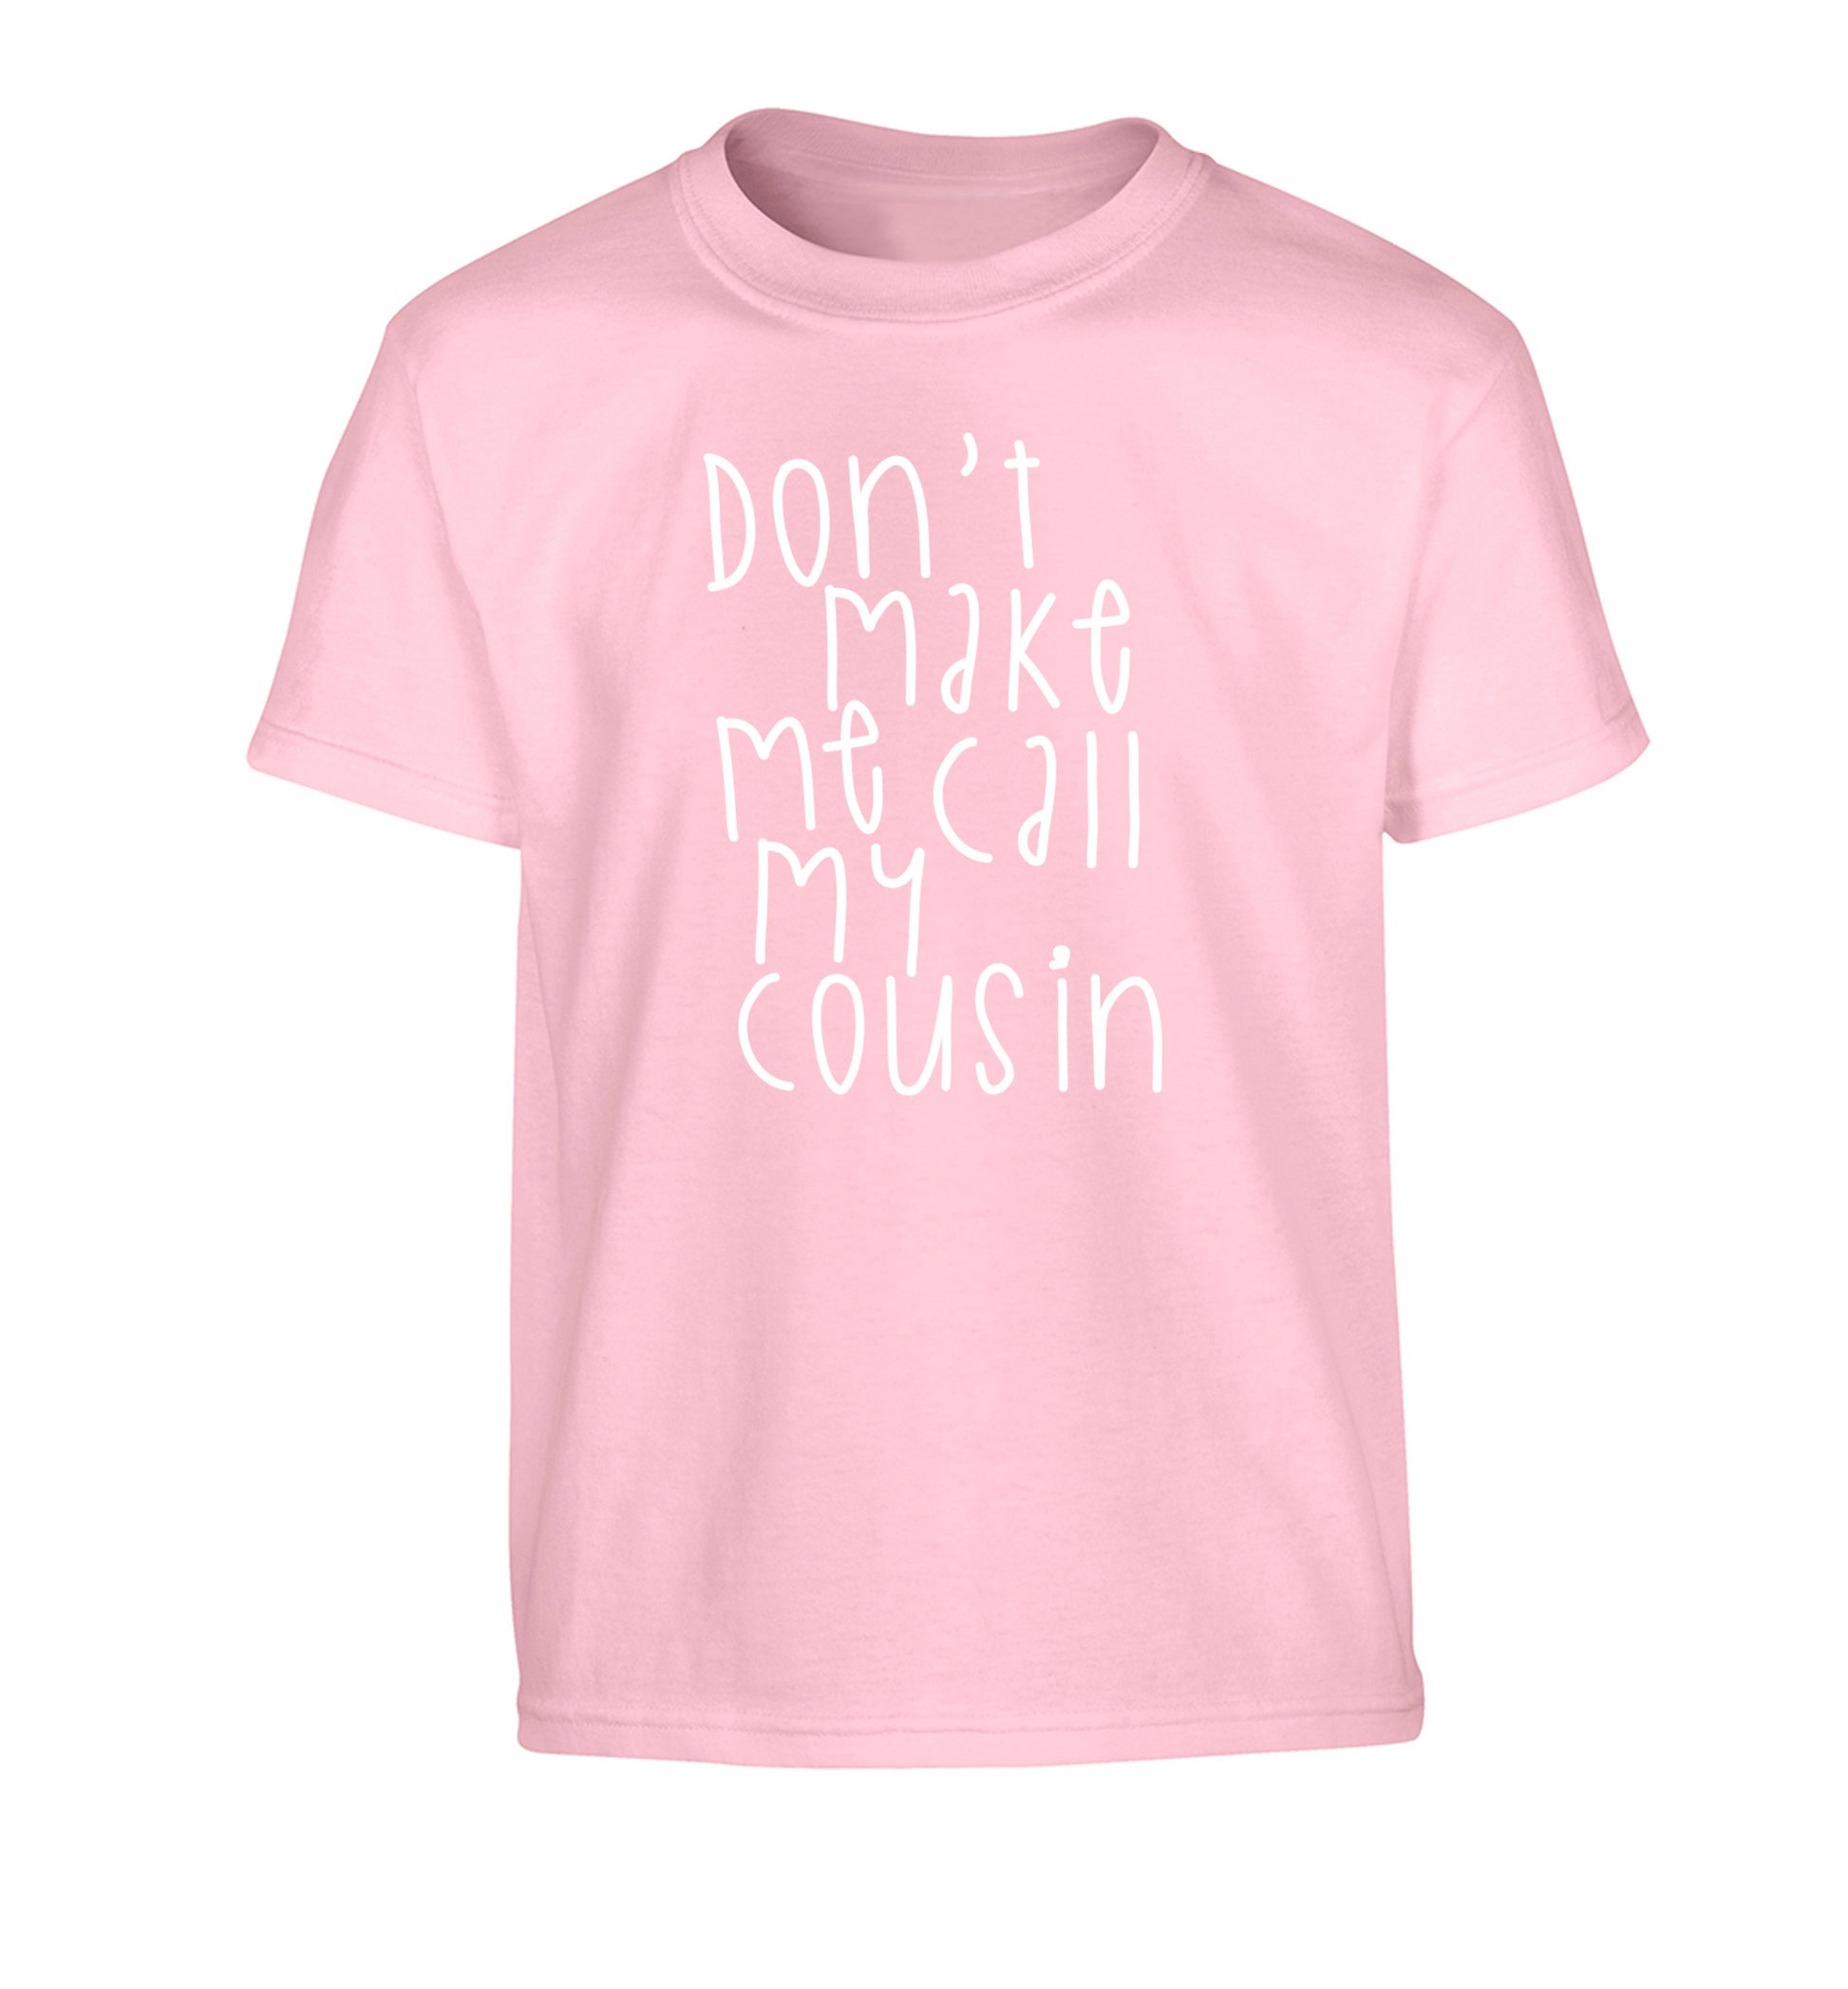 Don't make me call my cousin Children's light pink Tshirt 12-14 Years